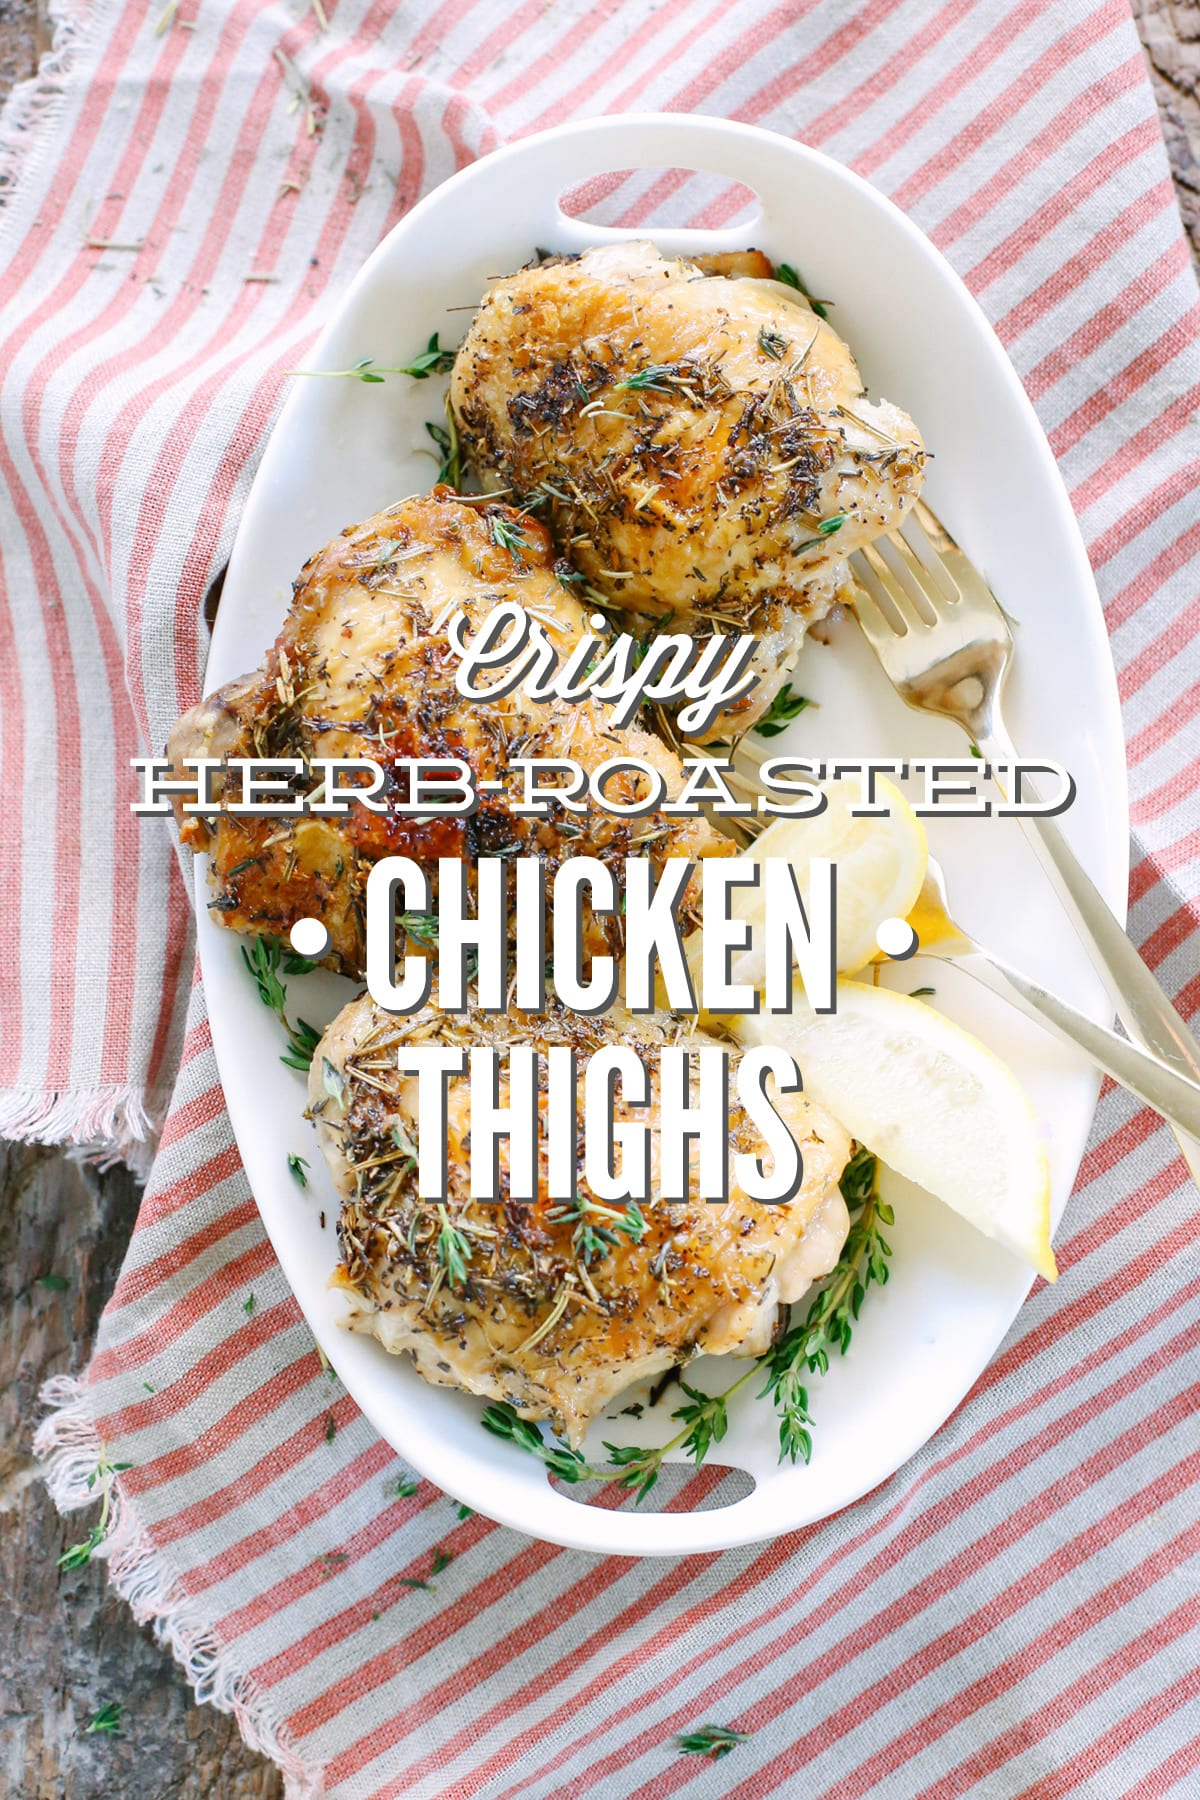 Crispy Herb-Roasted Chicken Thighs! Sooo good and so easy! I make these for dinner at least once week.